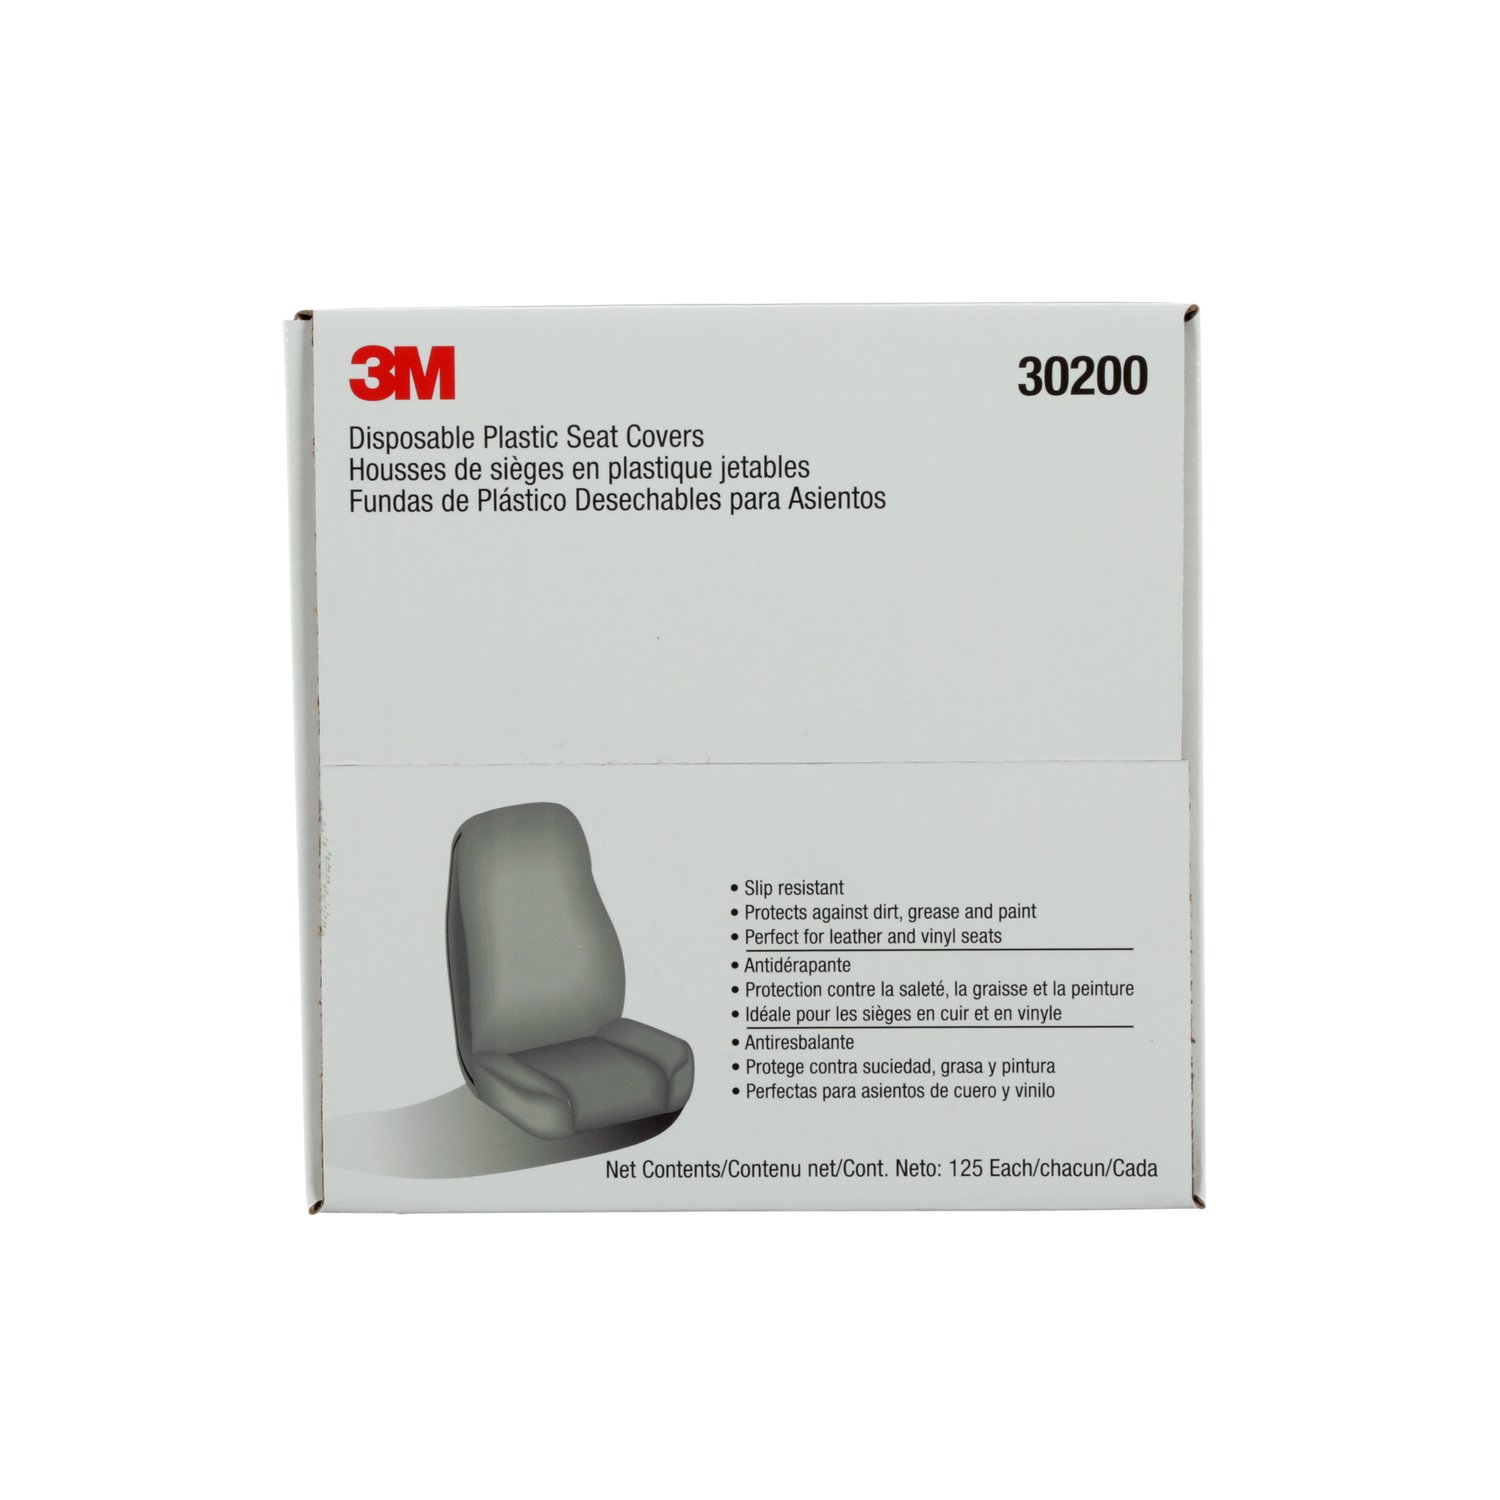 7000125073 - Marson Kwikee Disposable Plastic Seat covers, 30200, 125 per pack, 1
pack per case